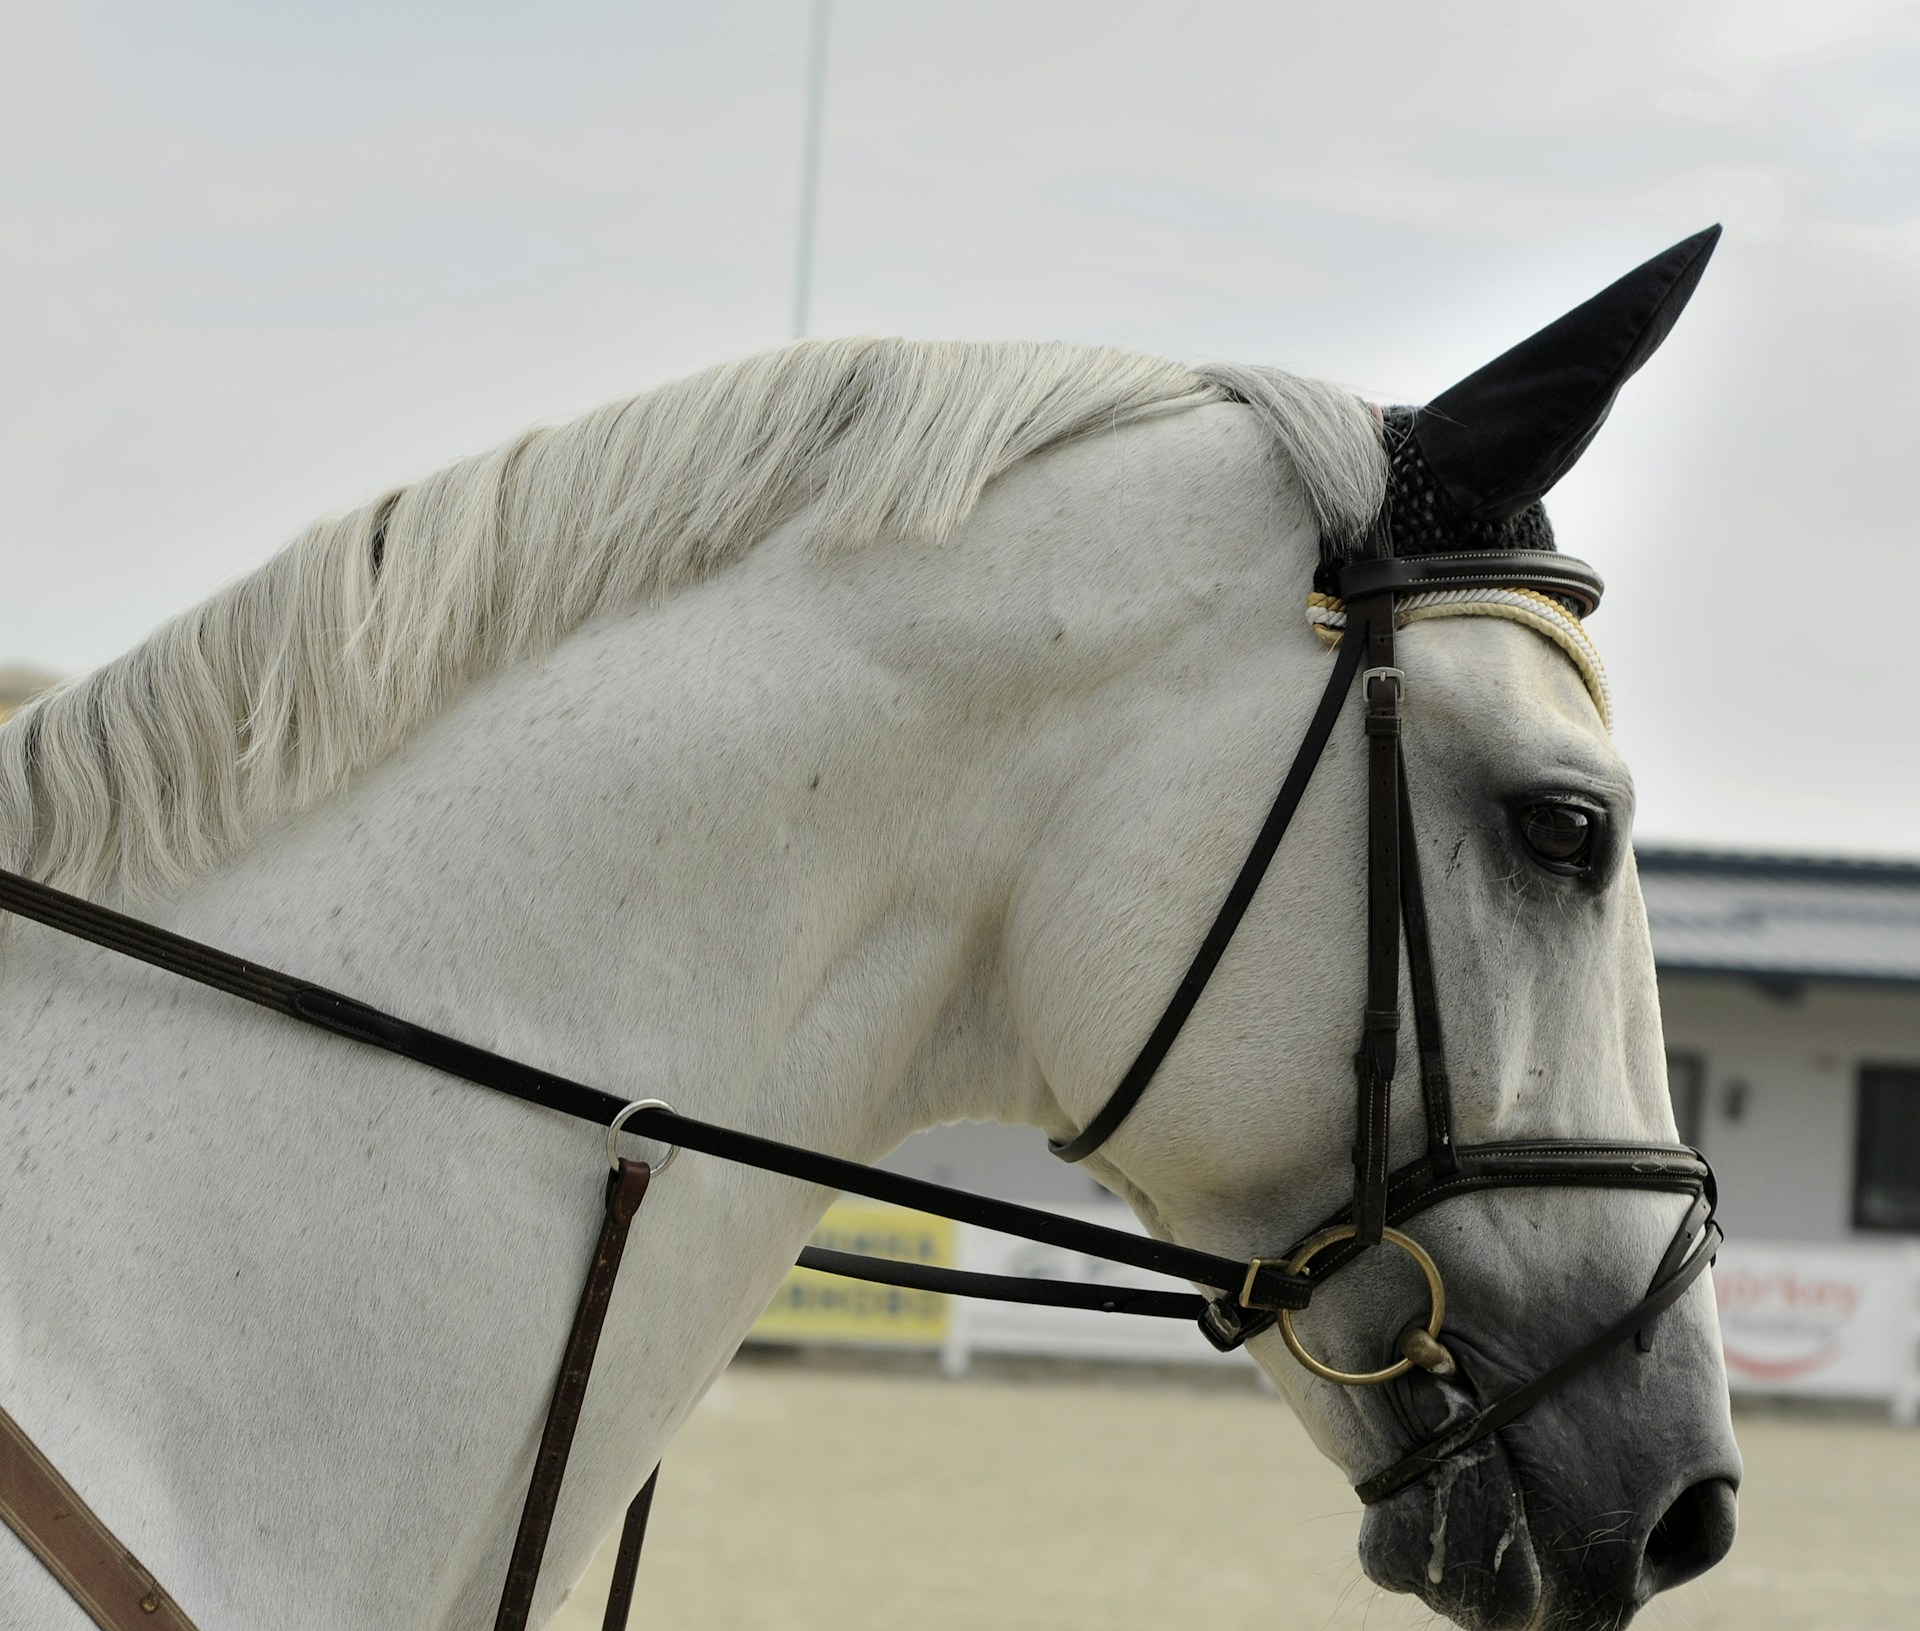 A drooling white horse in a harness